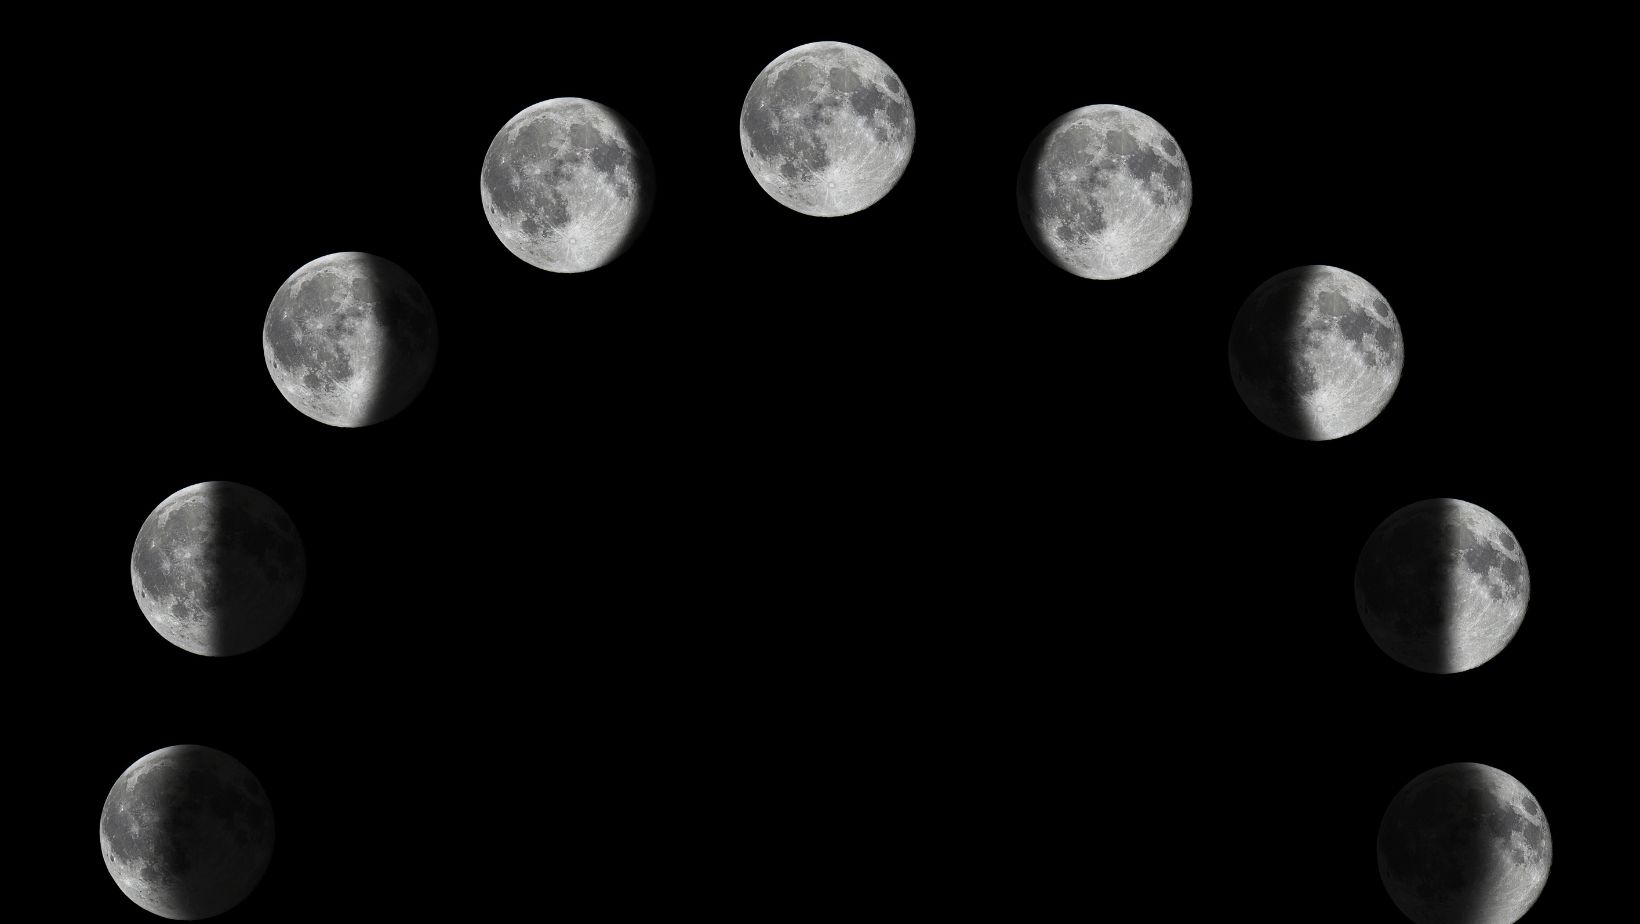 Moon phases, What Role Does the Moon Play in Mythological Stories